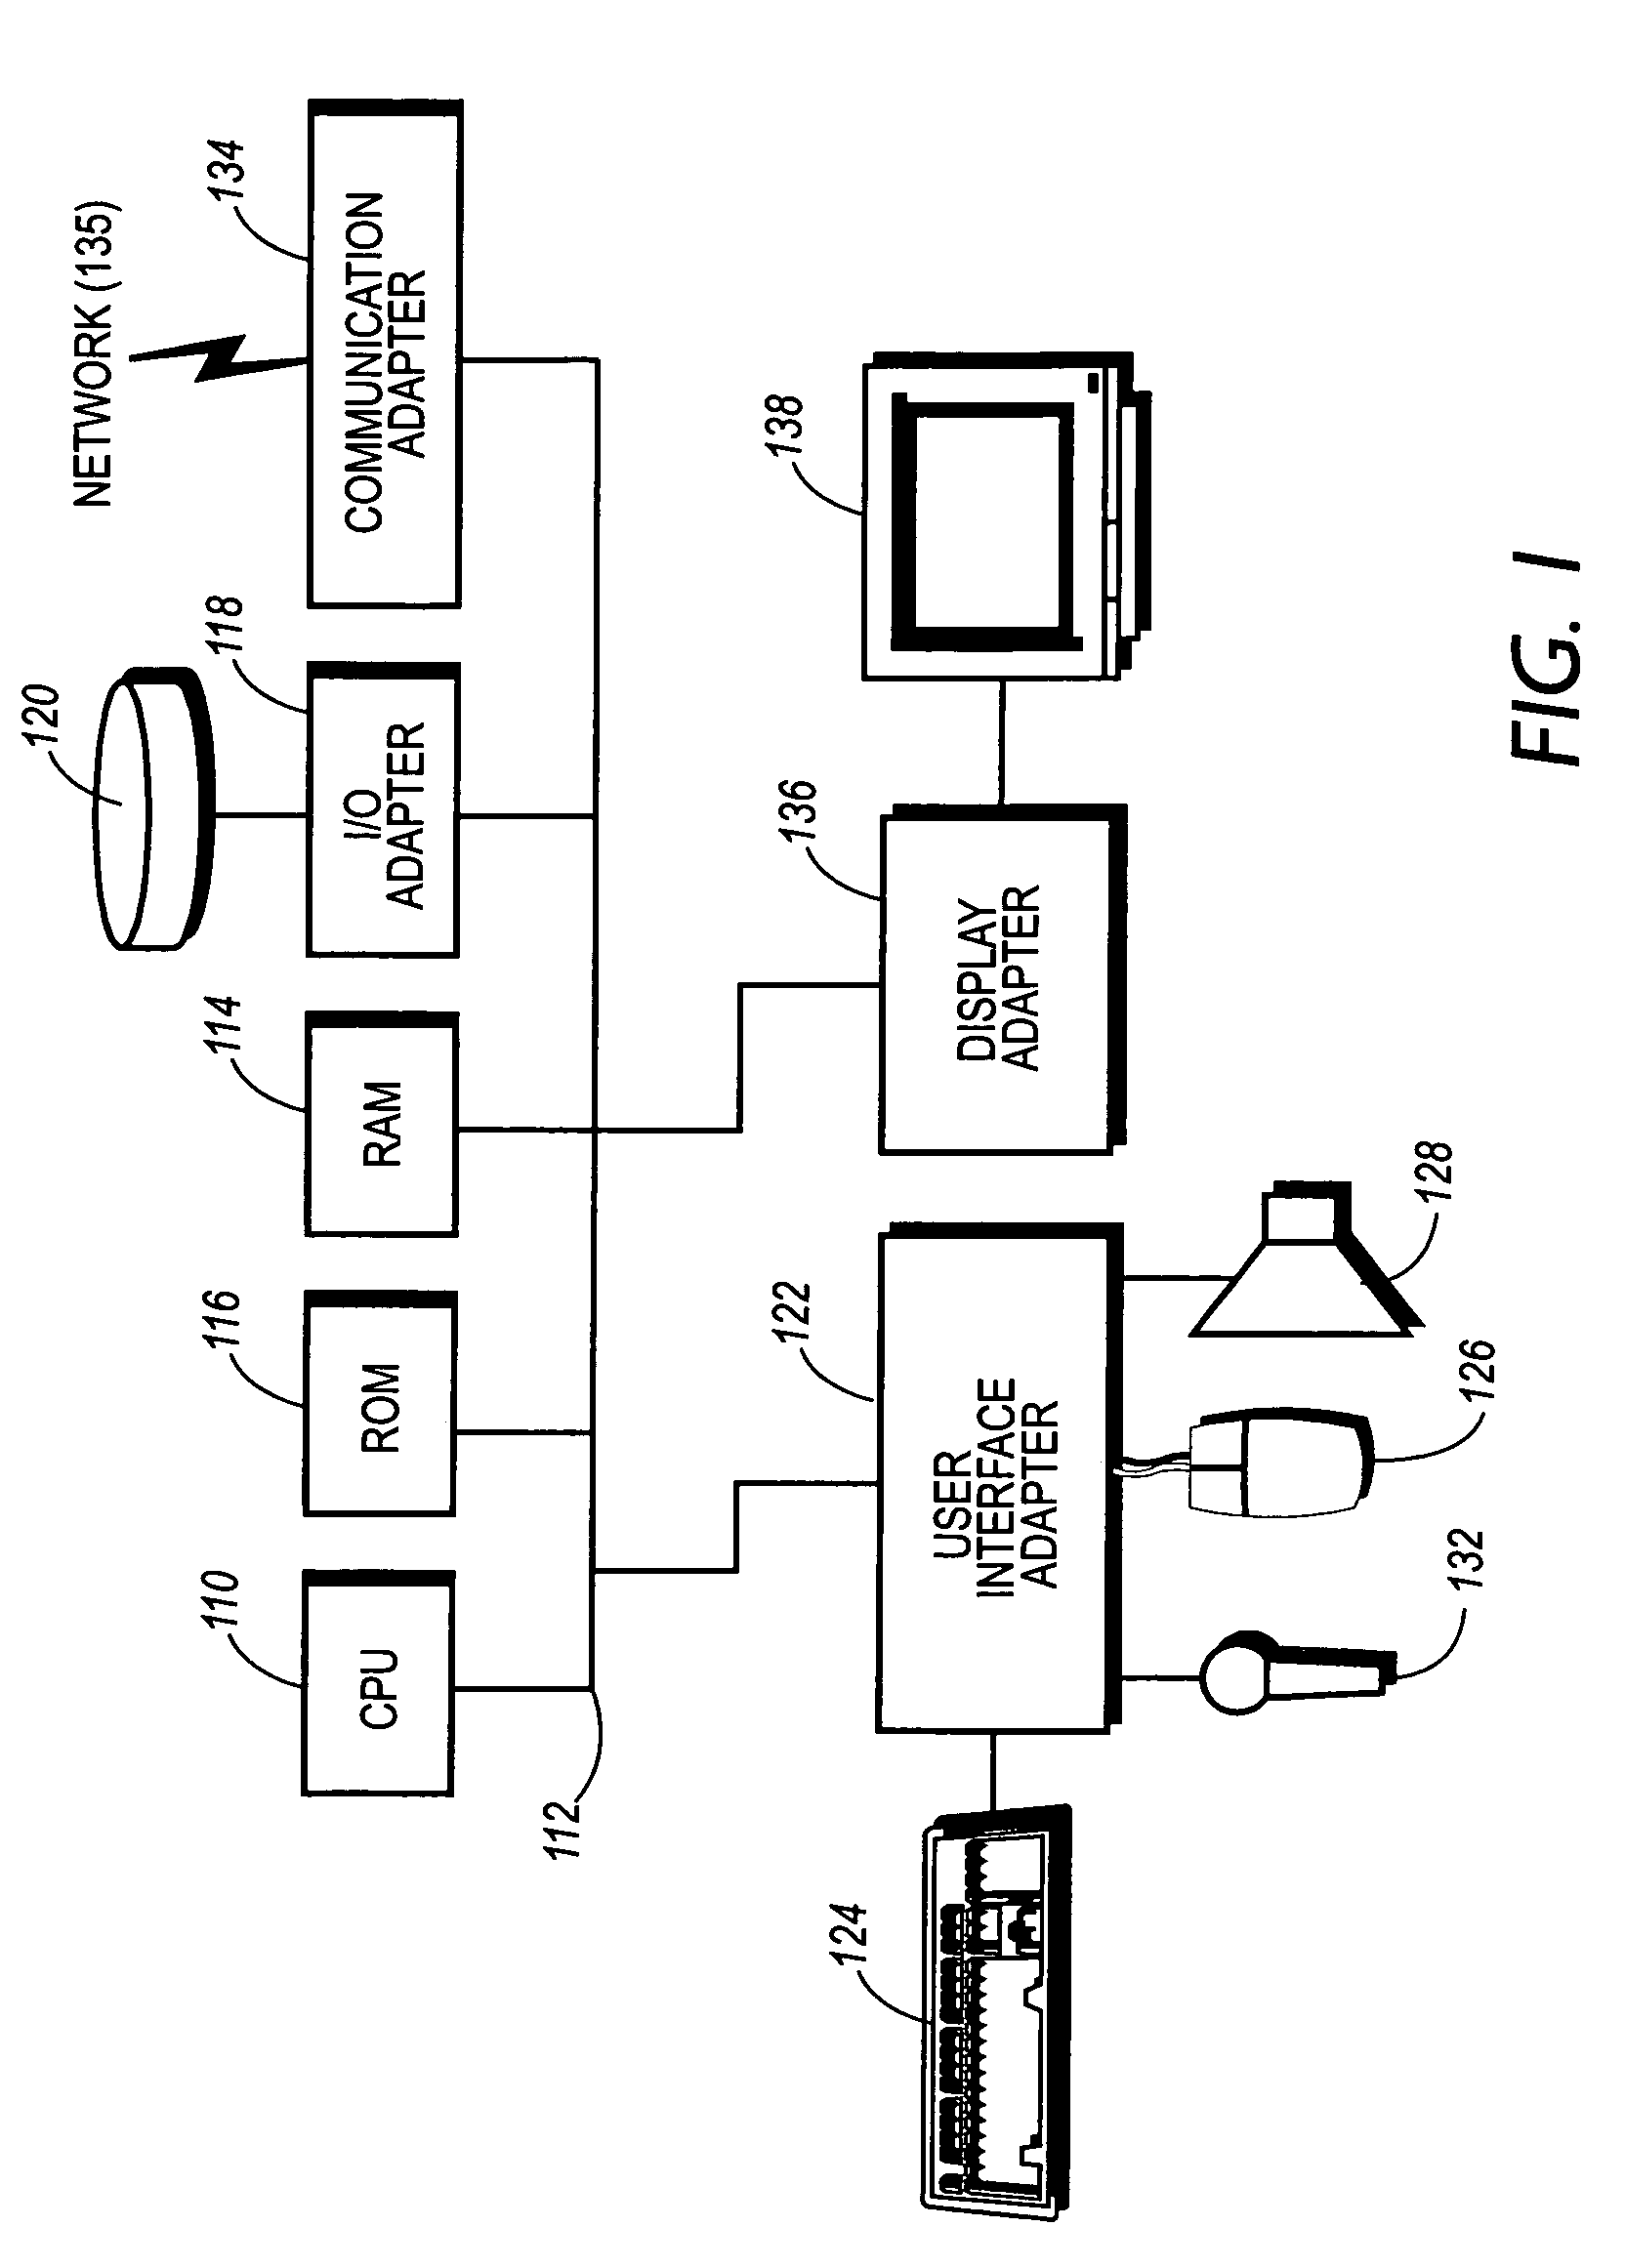 System, method and article of manufacture for cryptoserver-based auction